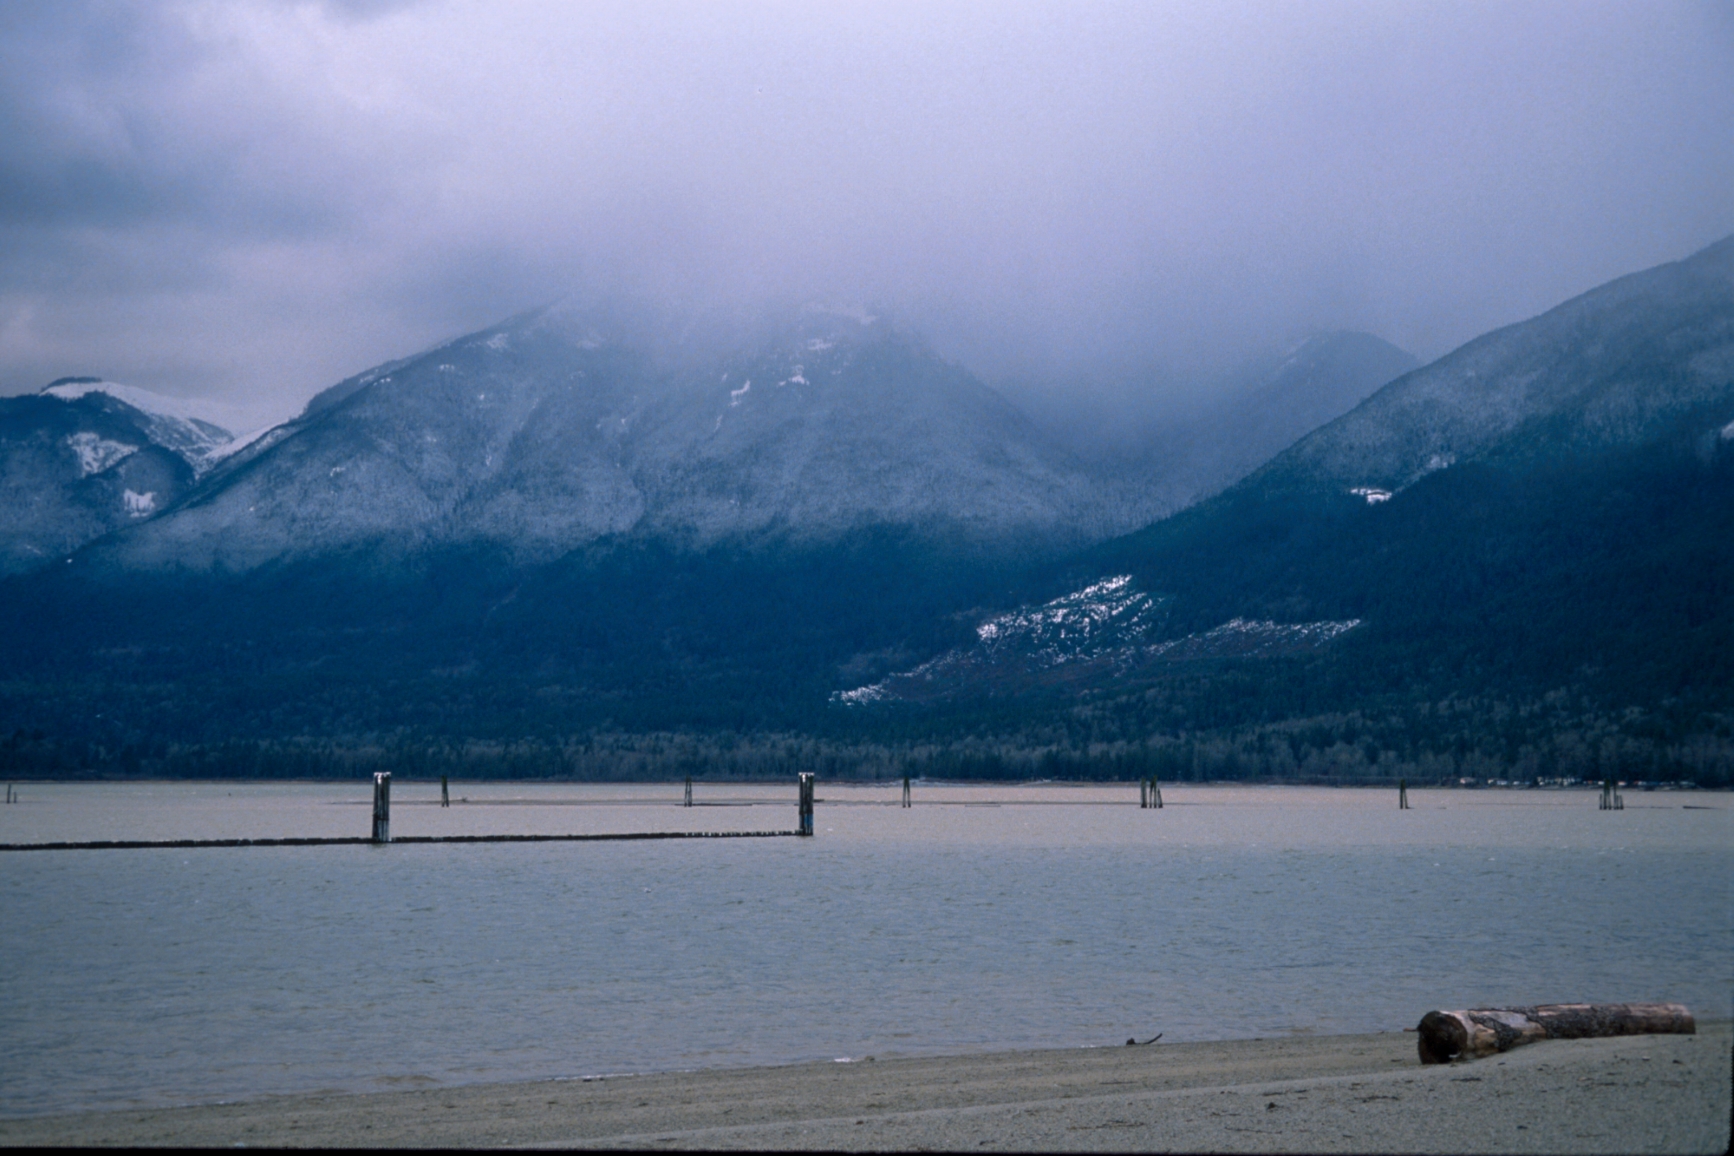 View from the shoreline of the lake and snowcapped mountains in the distance.